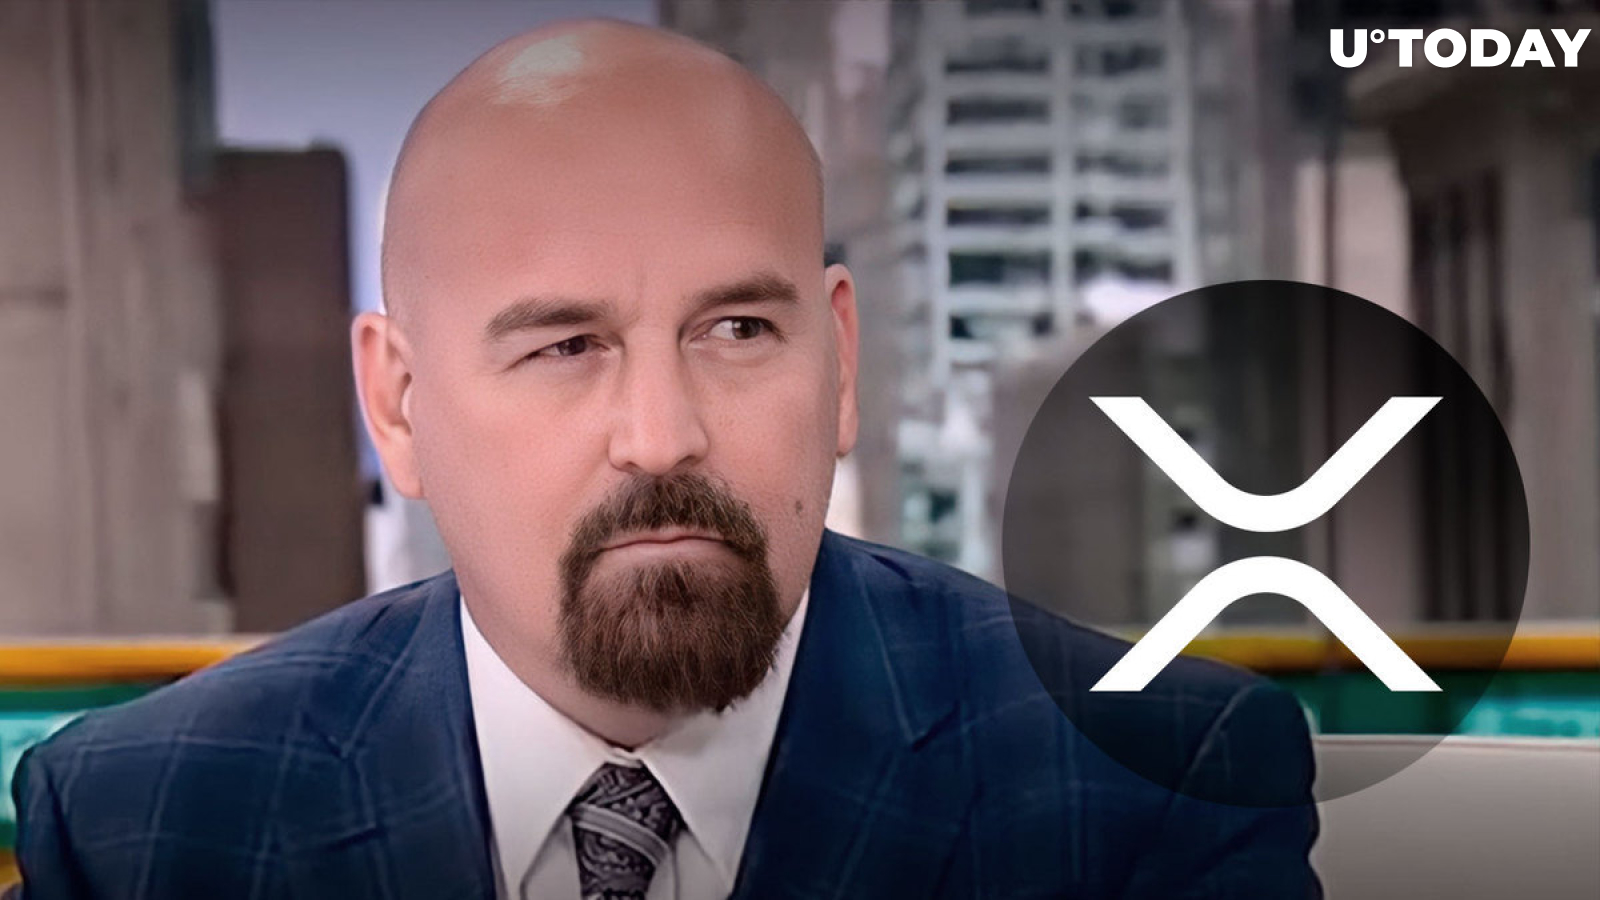 XRP Holders' Lawyer Shares Key Facts Amid Summary Judgment Delay